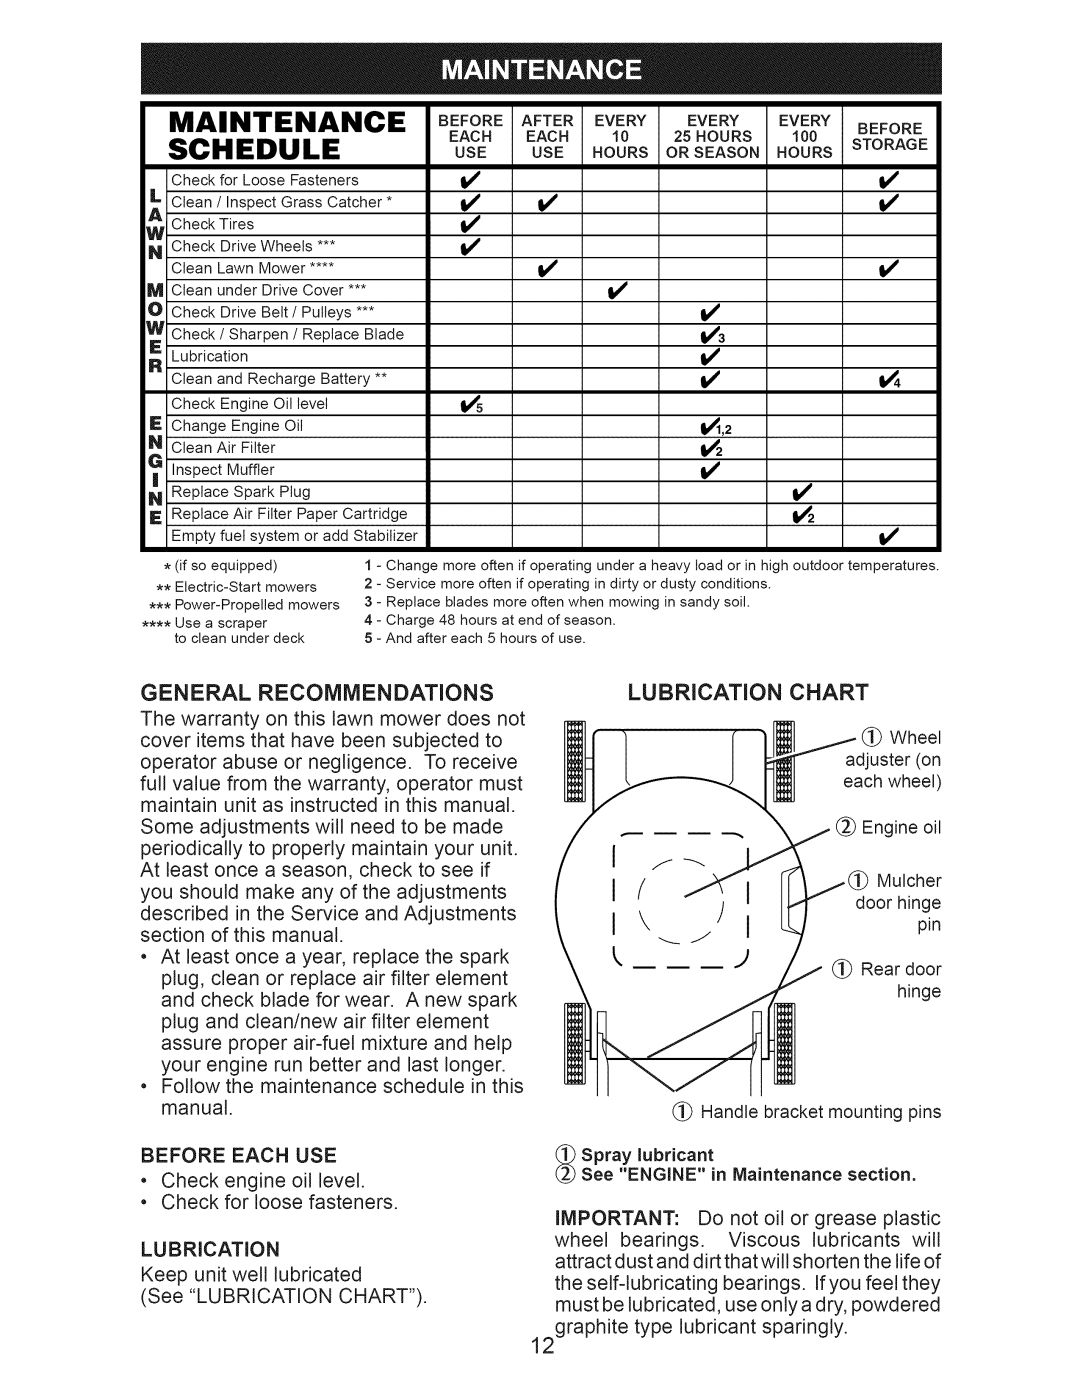 Craftsman 917.376402 owner manual Maintenance, Schedule, Use Hours 